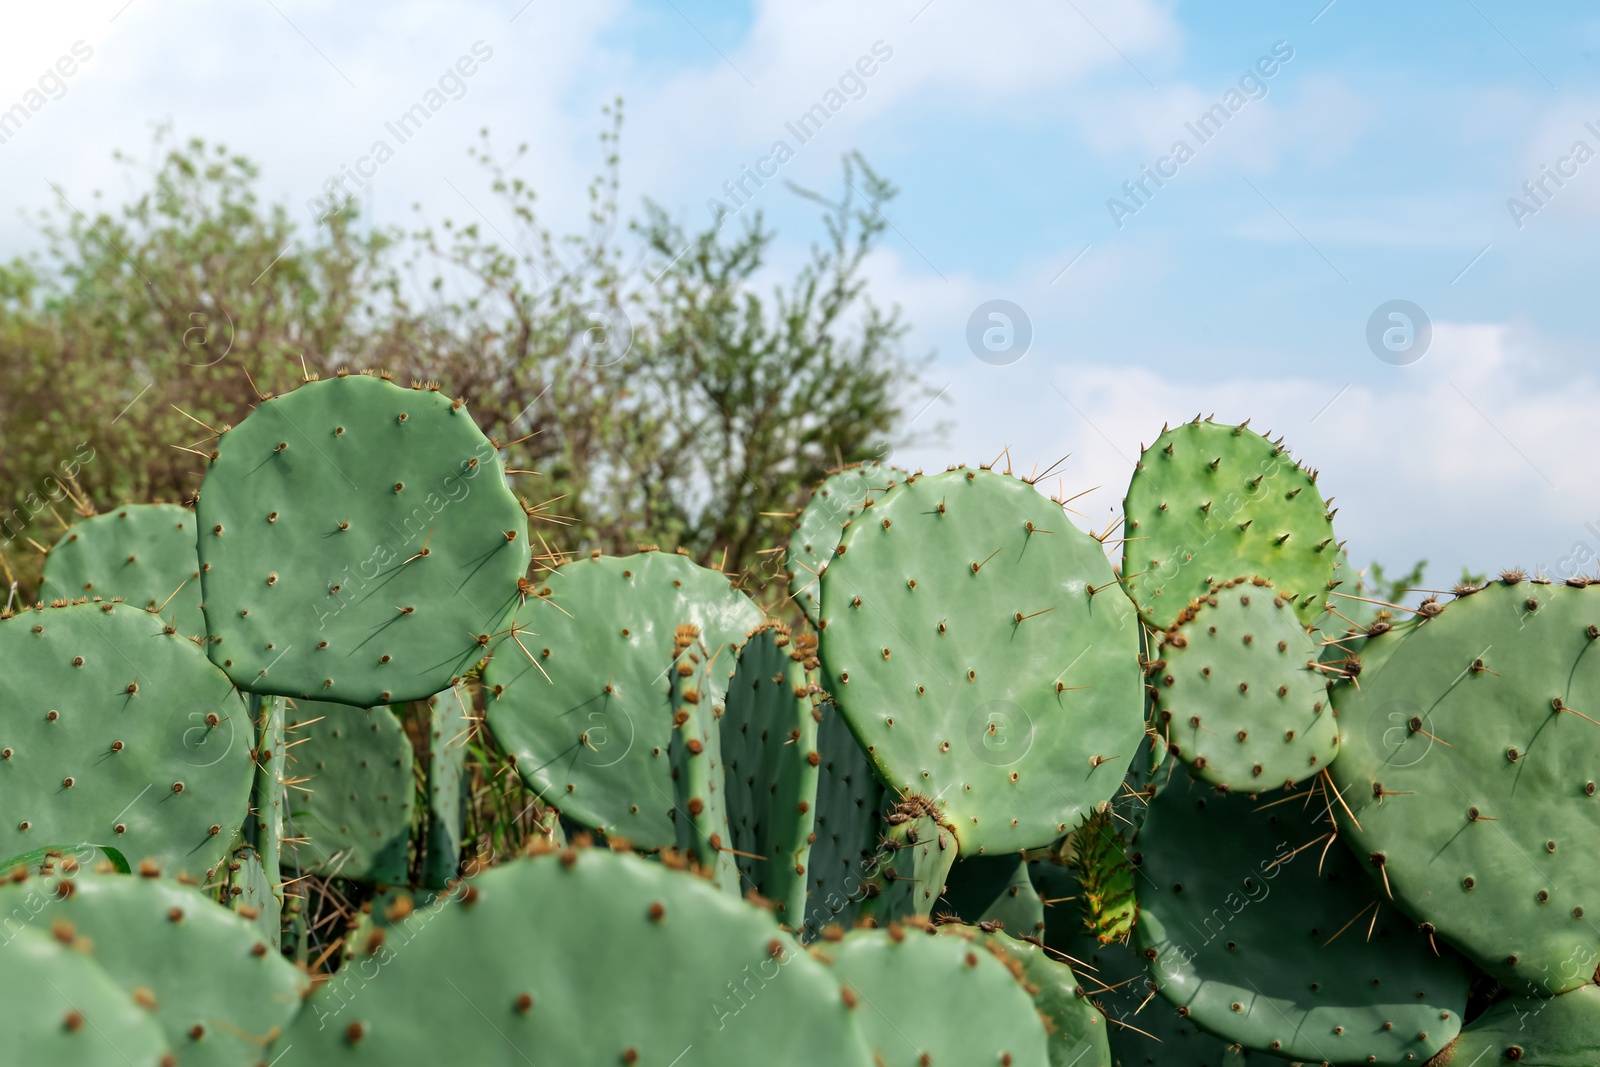 Photo of Beautiful view of cactuses with thorns against under cloudy sky, closeup